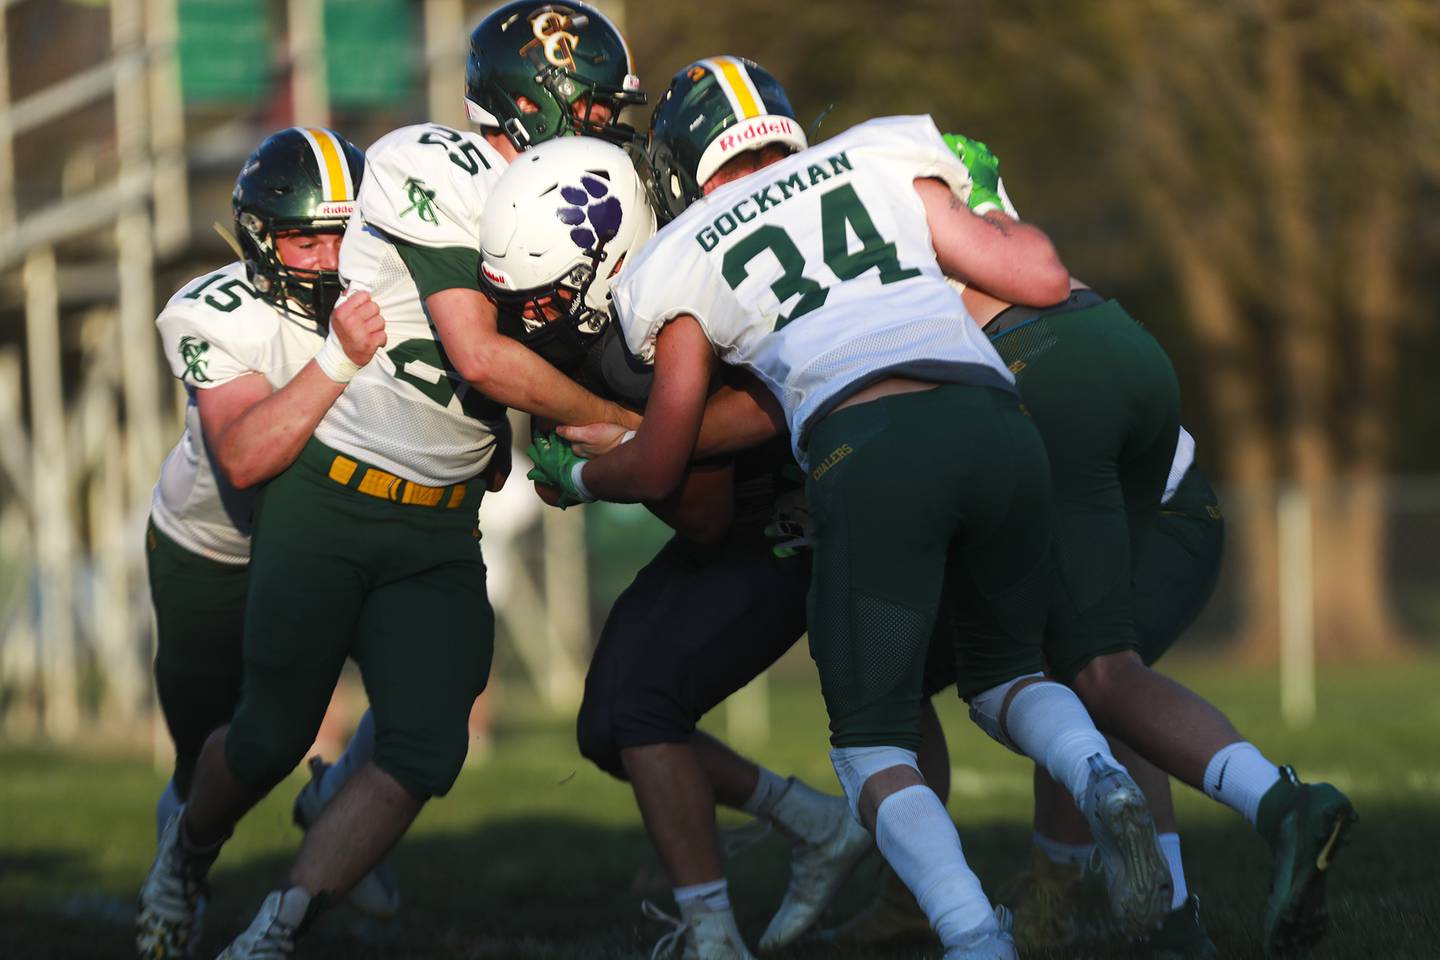 Wilmington running back Cody Franzen moves the pile on Friday, April 9, 2021, at Wilmington High School in Wilmington, Ill.